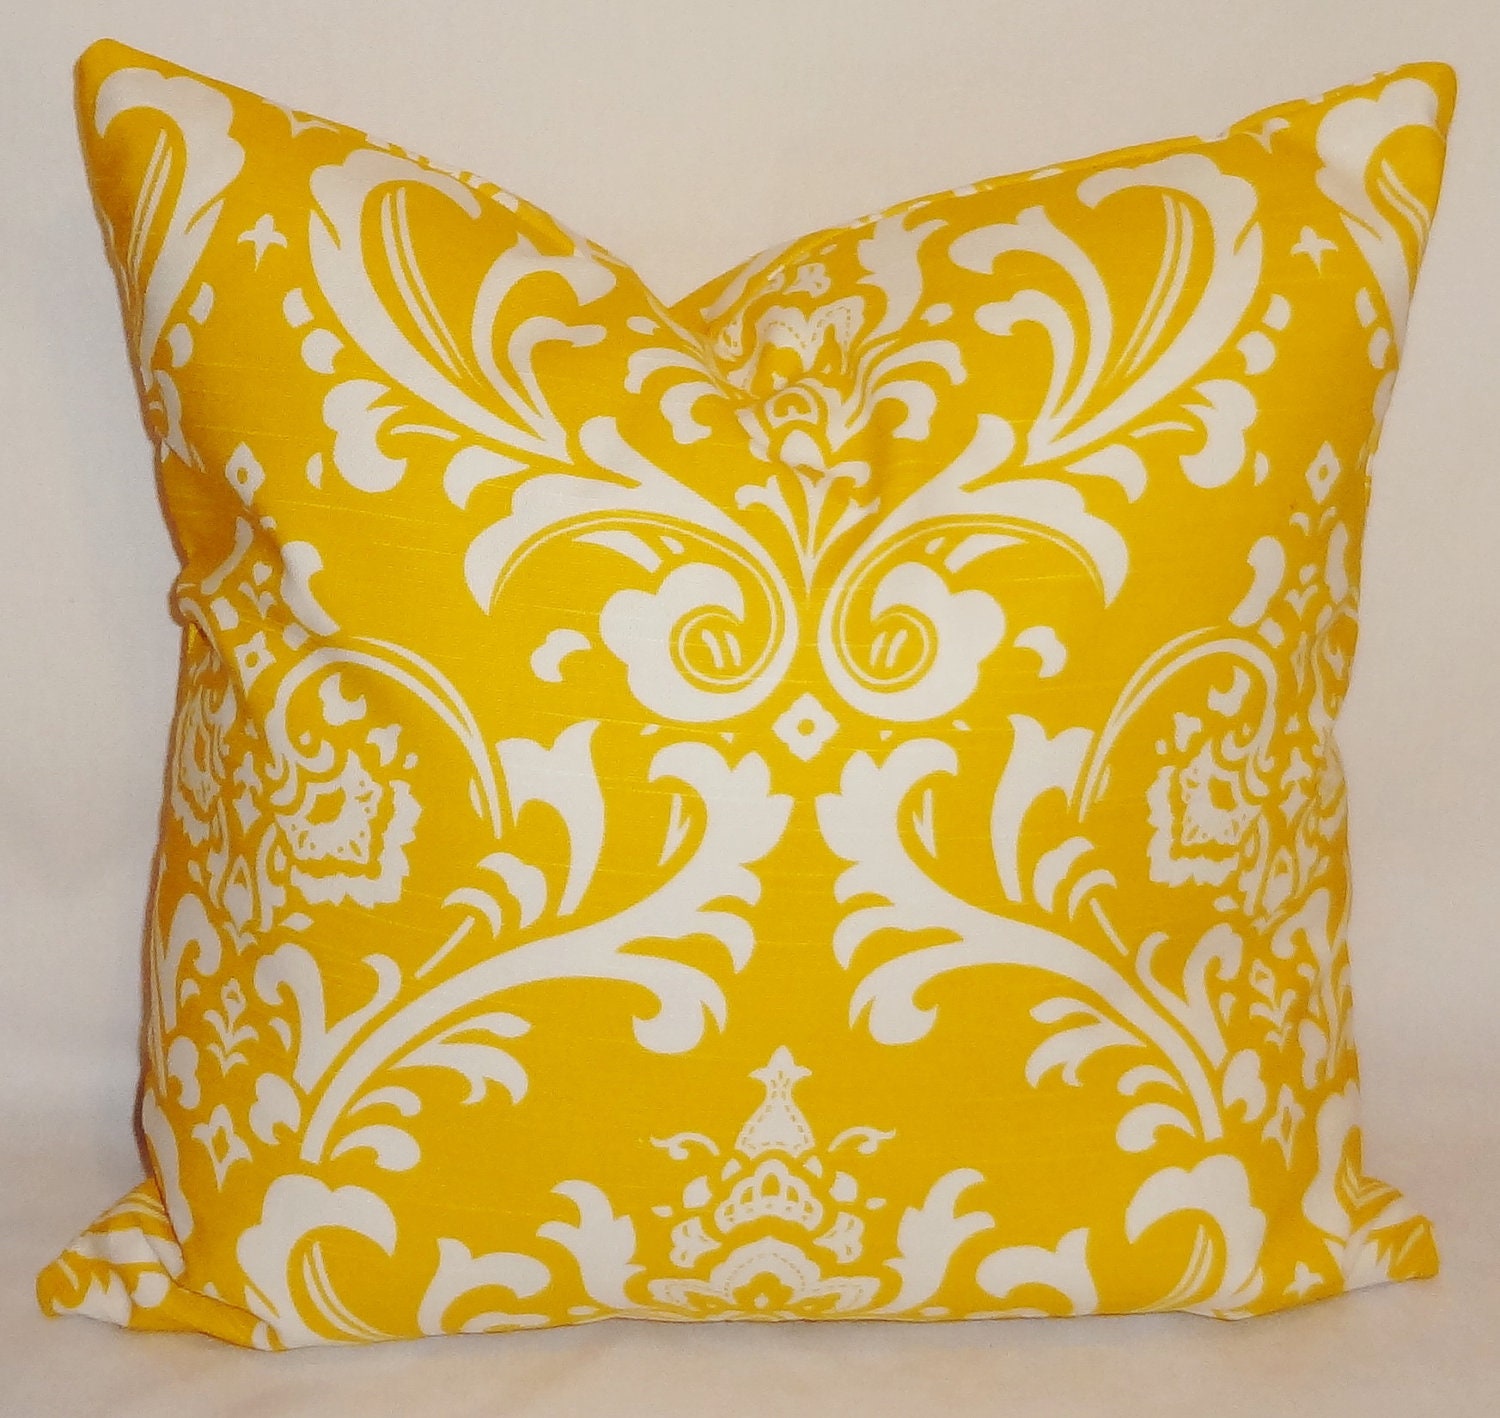 Decorative Pillows Corn Yellow/White Damask Pillow by HomeLiving